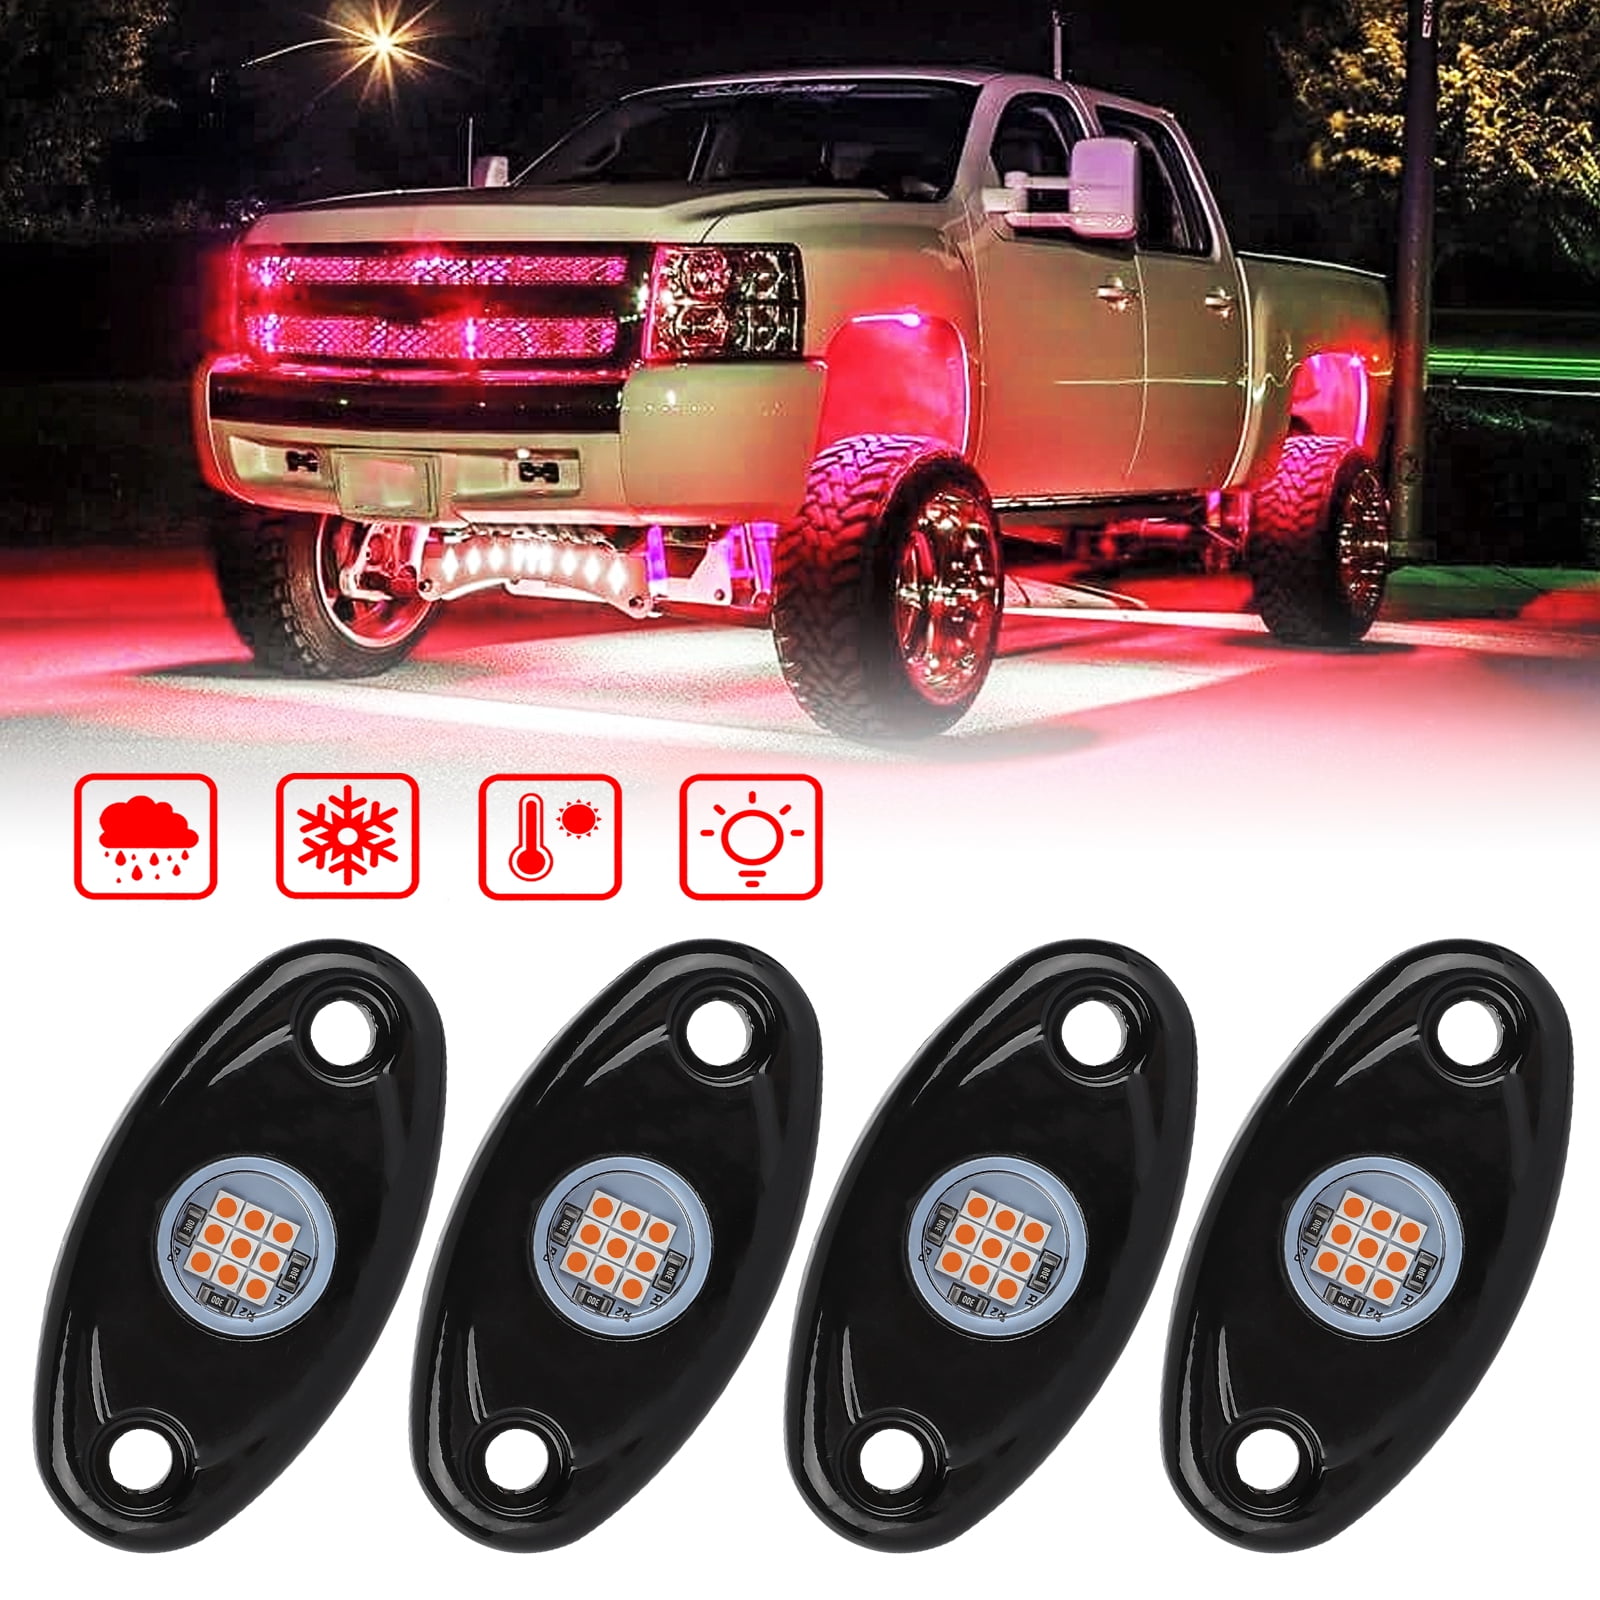 1 Pod for Replacement 1 Pod for Replacement Rgb Led Rock Lights Kits with Bluetooth Control Waterproof Neon Lights for Cars Jeep Off Road Truck SUV ATV 